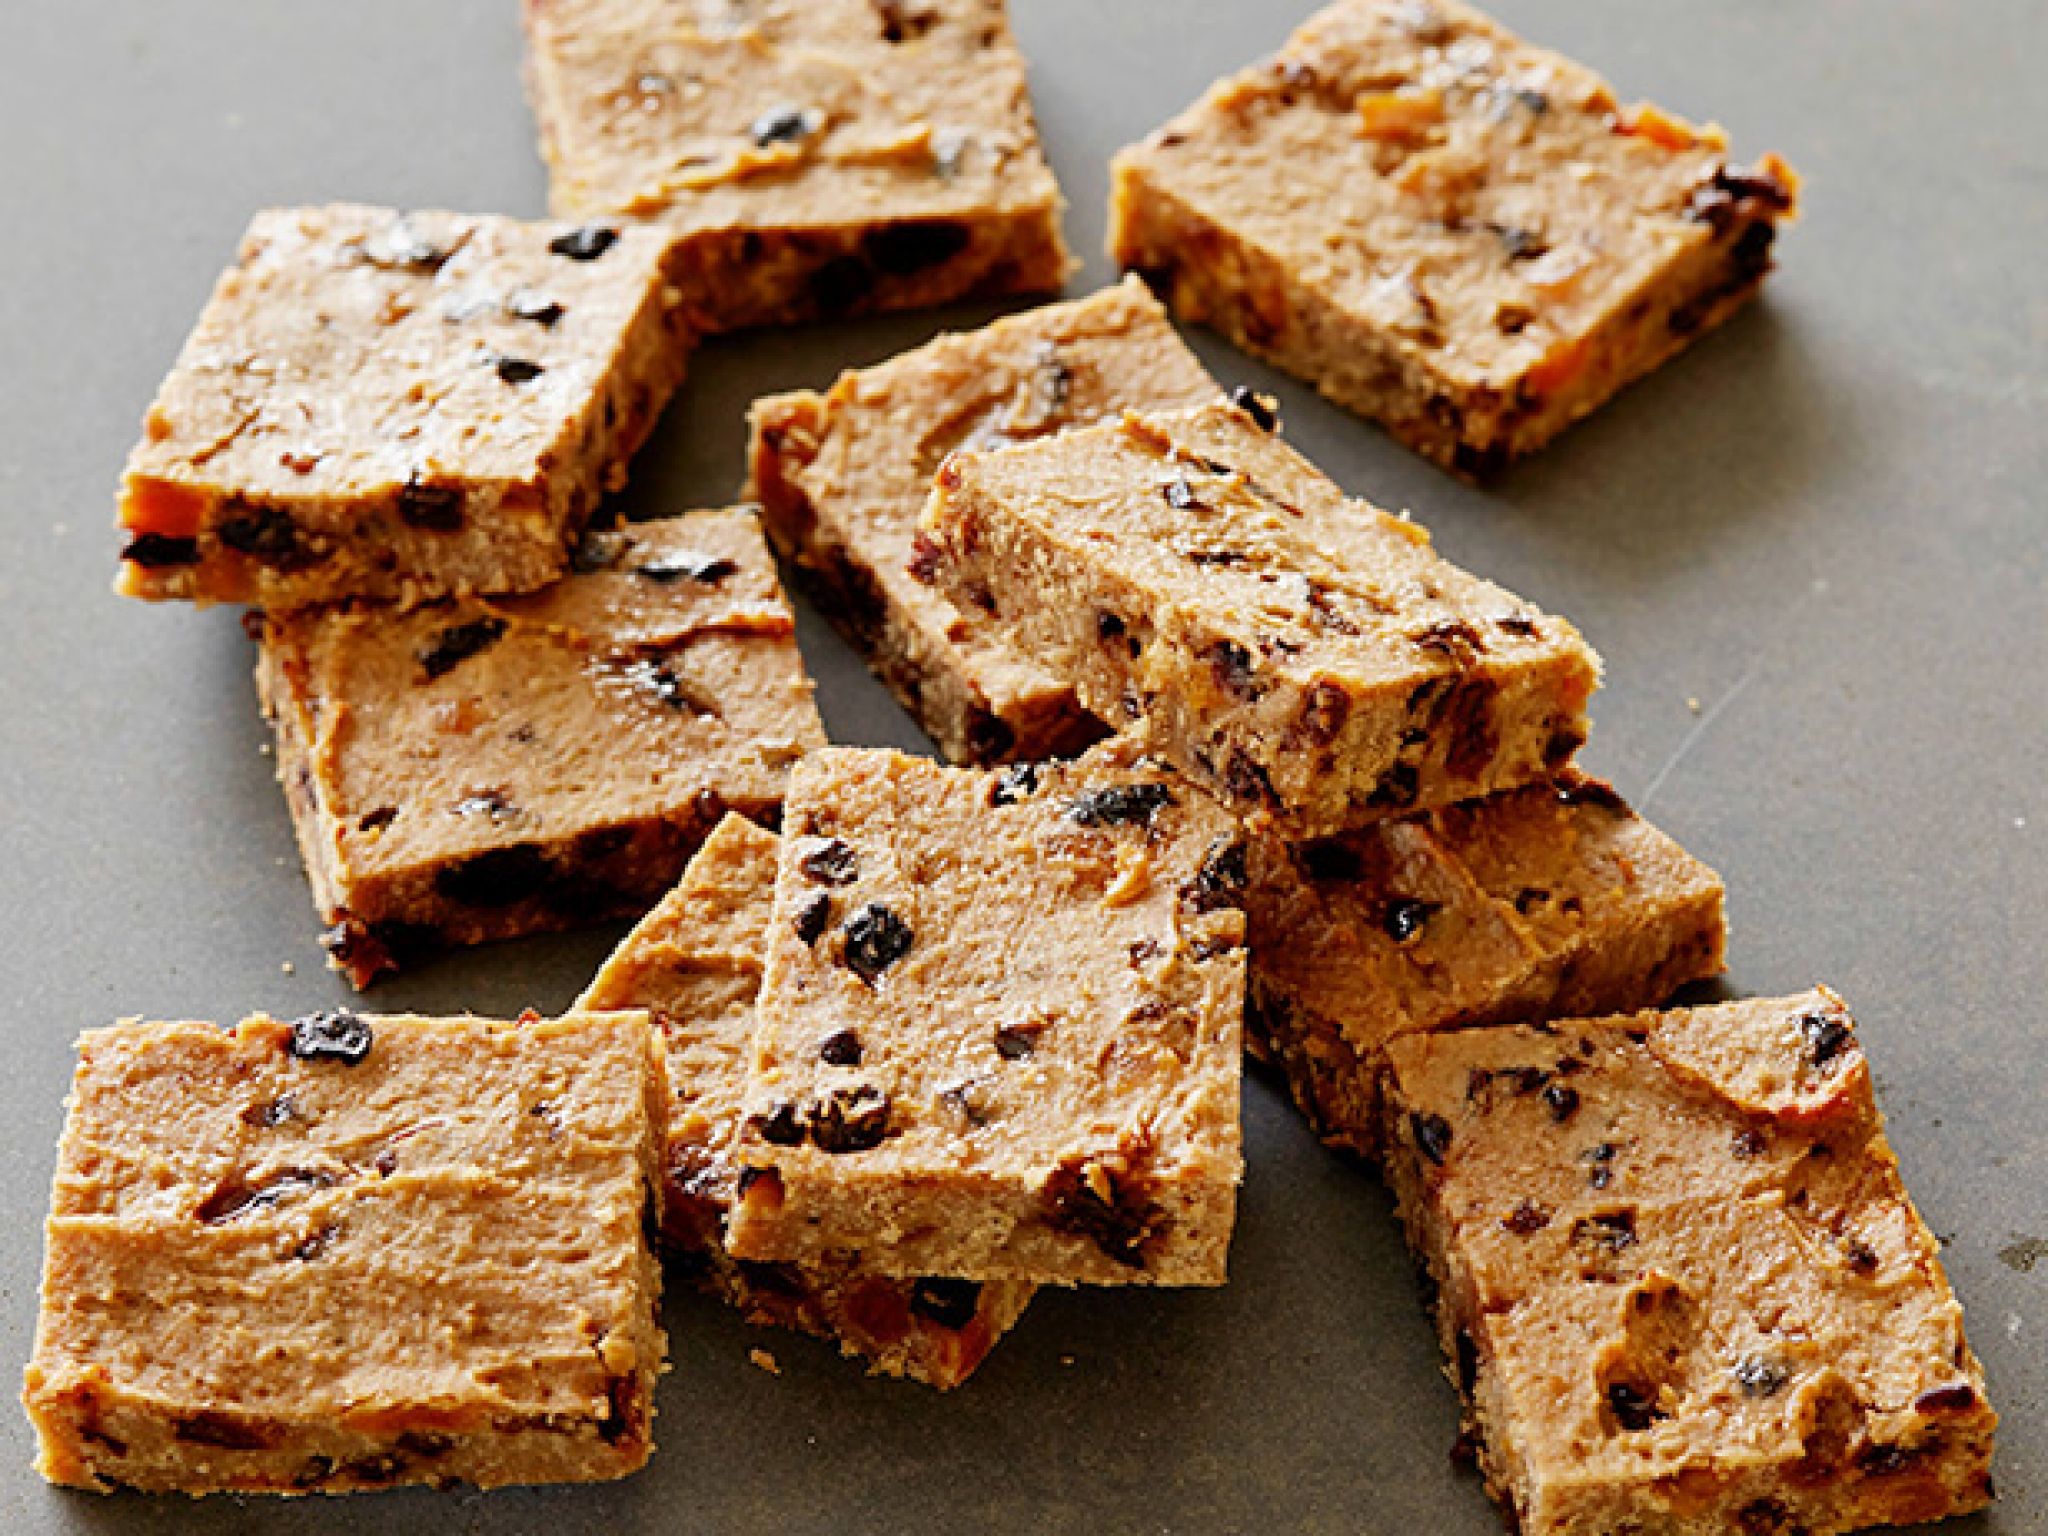 11-healthy-diet-foods-that-can-actually-make-you-fat-protein-bars